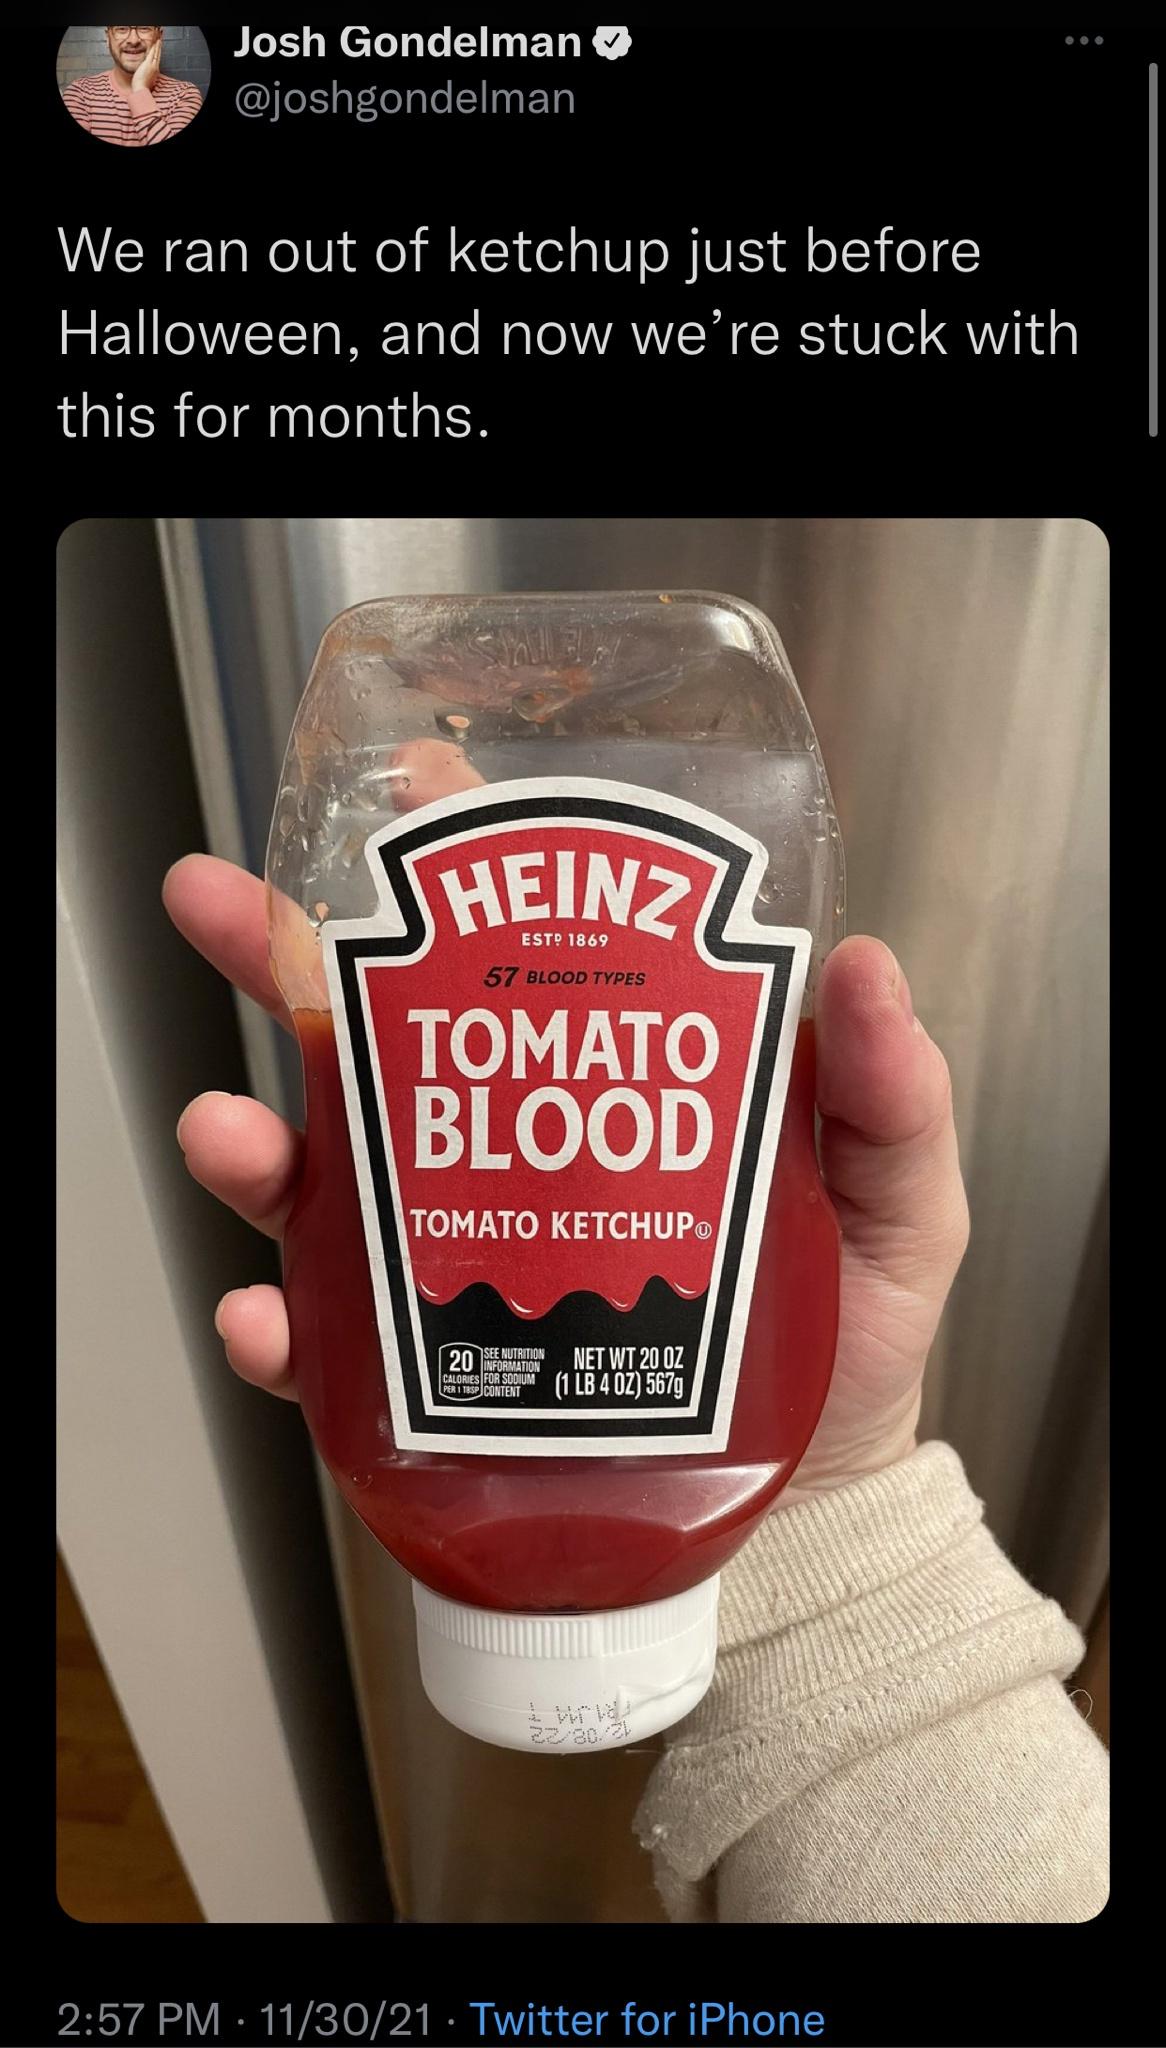 daily dose of randoms -  drink - Josh Gondelman We ran out of ketchup just before Halloween, and now we're stuck with this for months. Est! 1869 57 Blood Types Tomato Blood Tomato Ketchup See Nutrition 20 Information Net Wt 20 Oz Calories For Sodium 1 Lb 